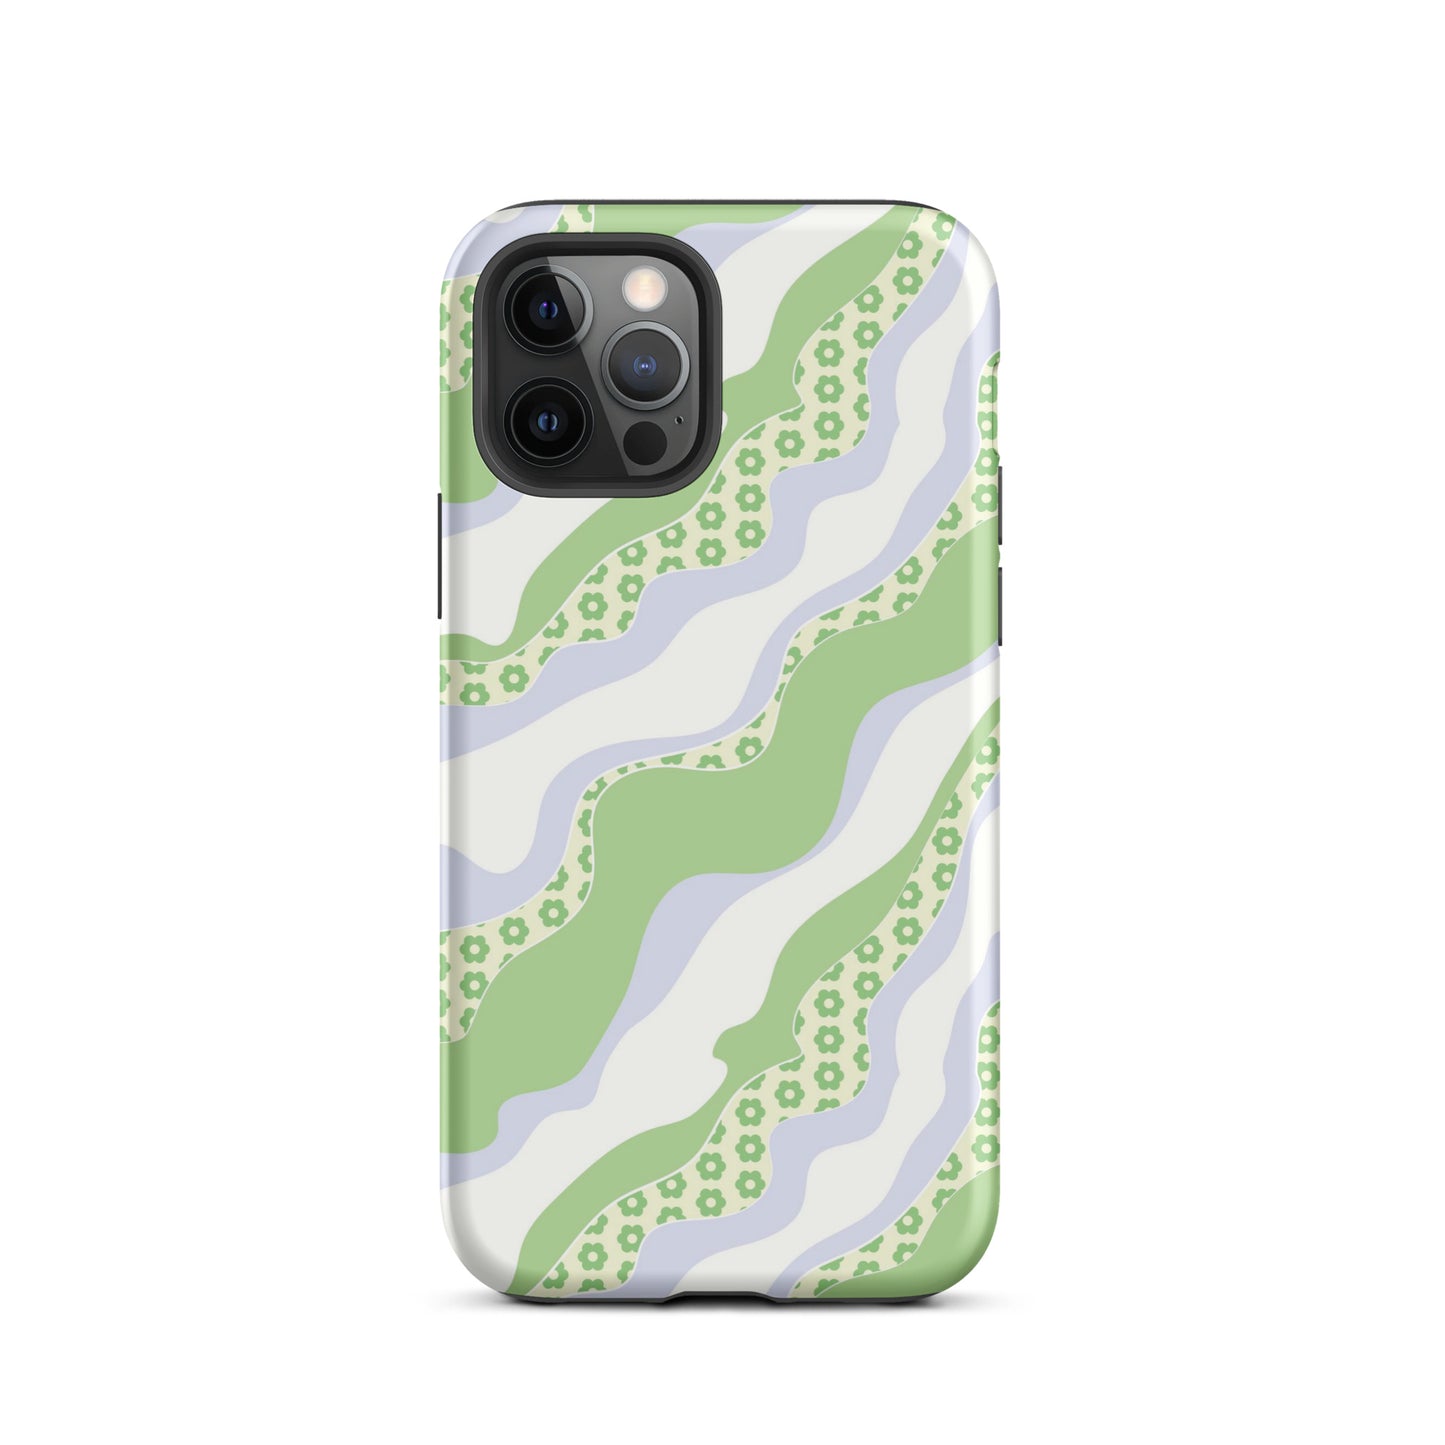 Flower Groove iPhone Case Matte iPhone 12 Pro